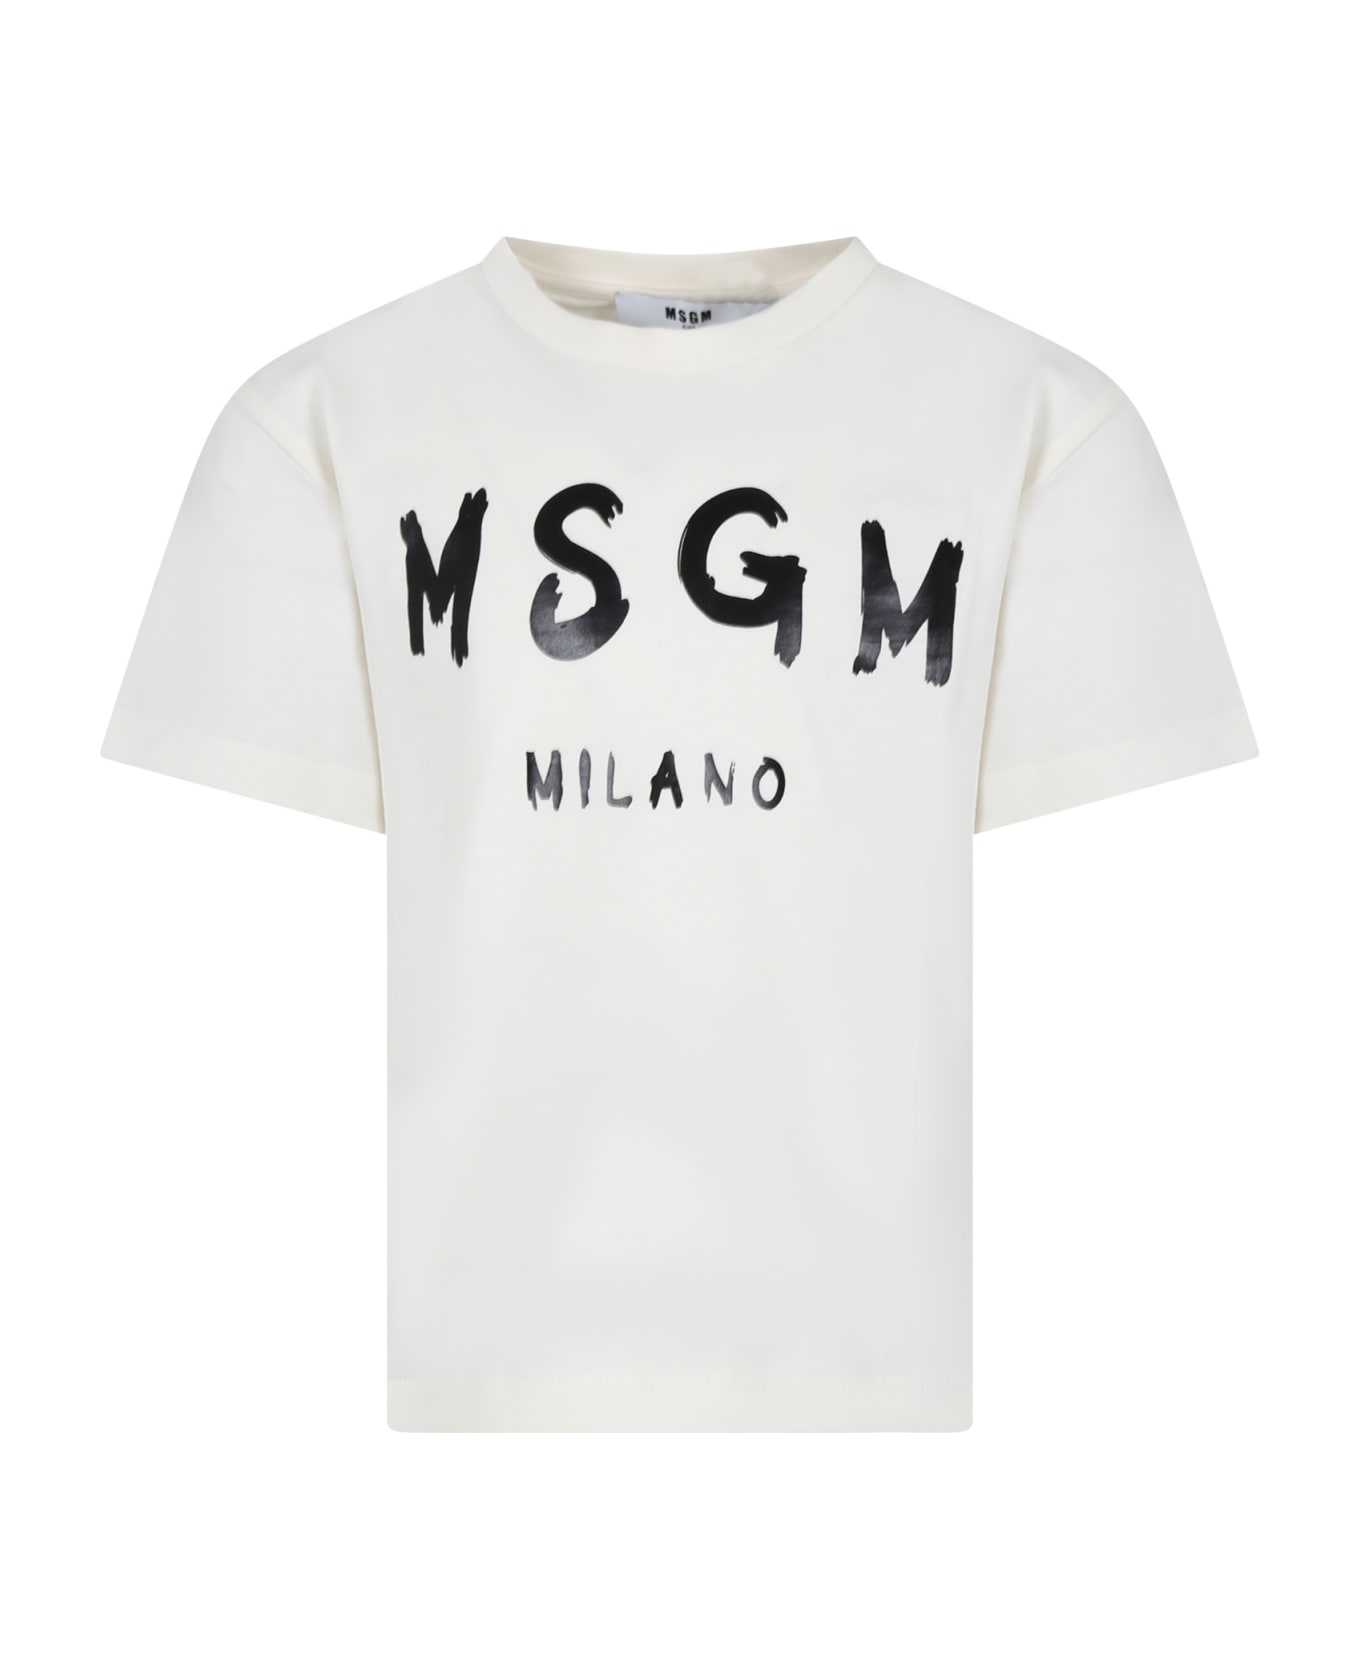 MSGM Ivory T-shirt For Kids With Logo - Ivory